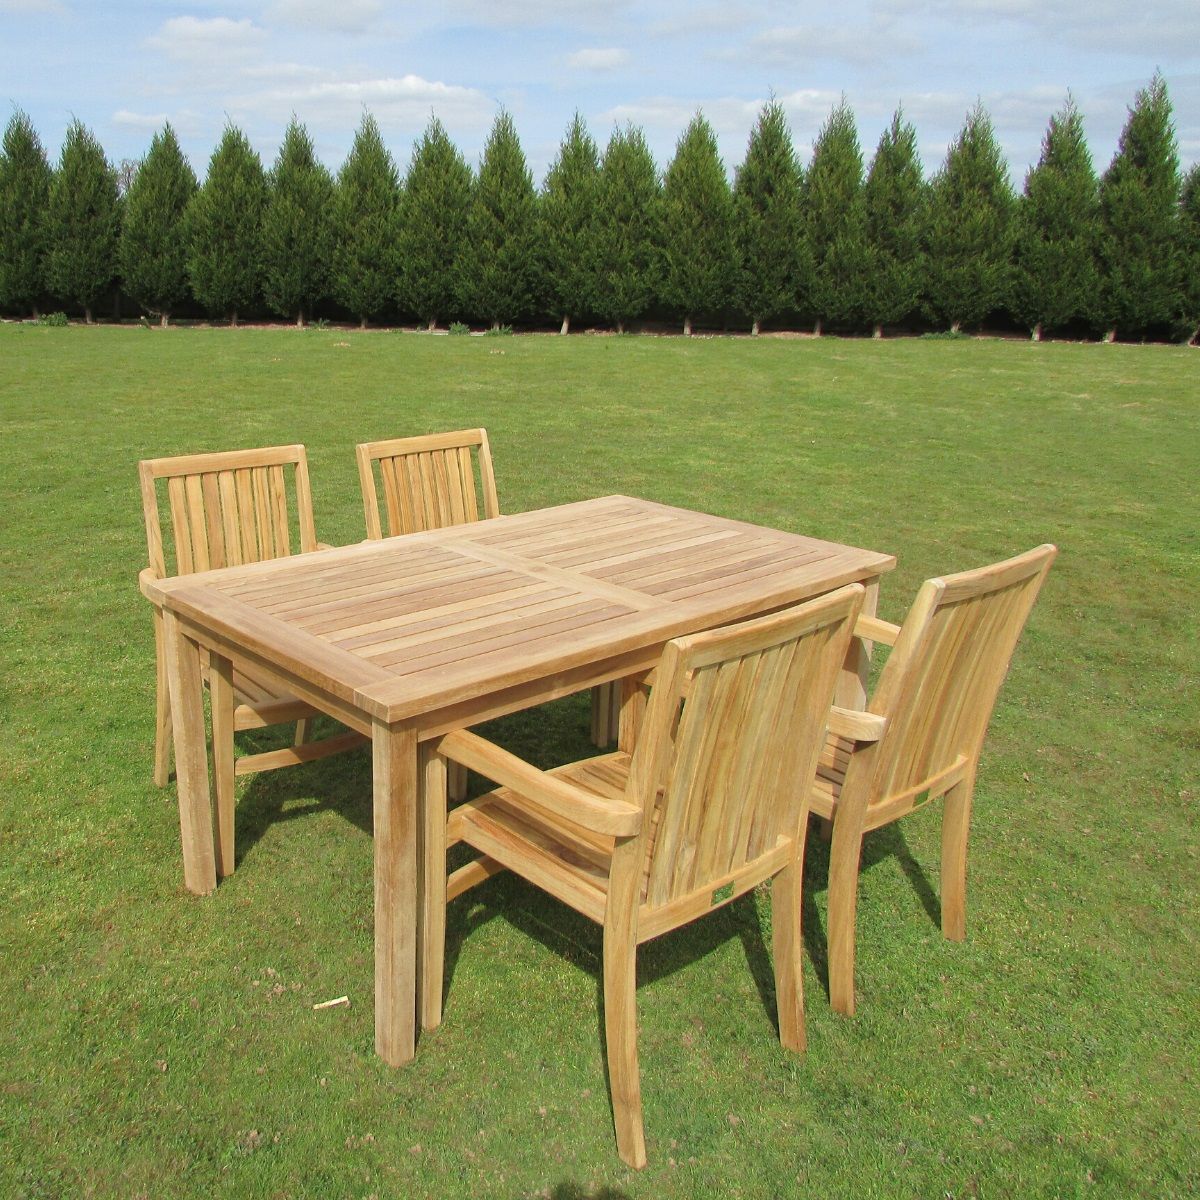 Teak Rectangular Table And 4 Chairs Set | Woodberry In Teak Wood Rectangular Patio Dining Sets (View 14 of 15)